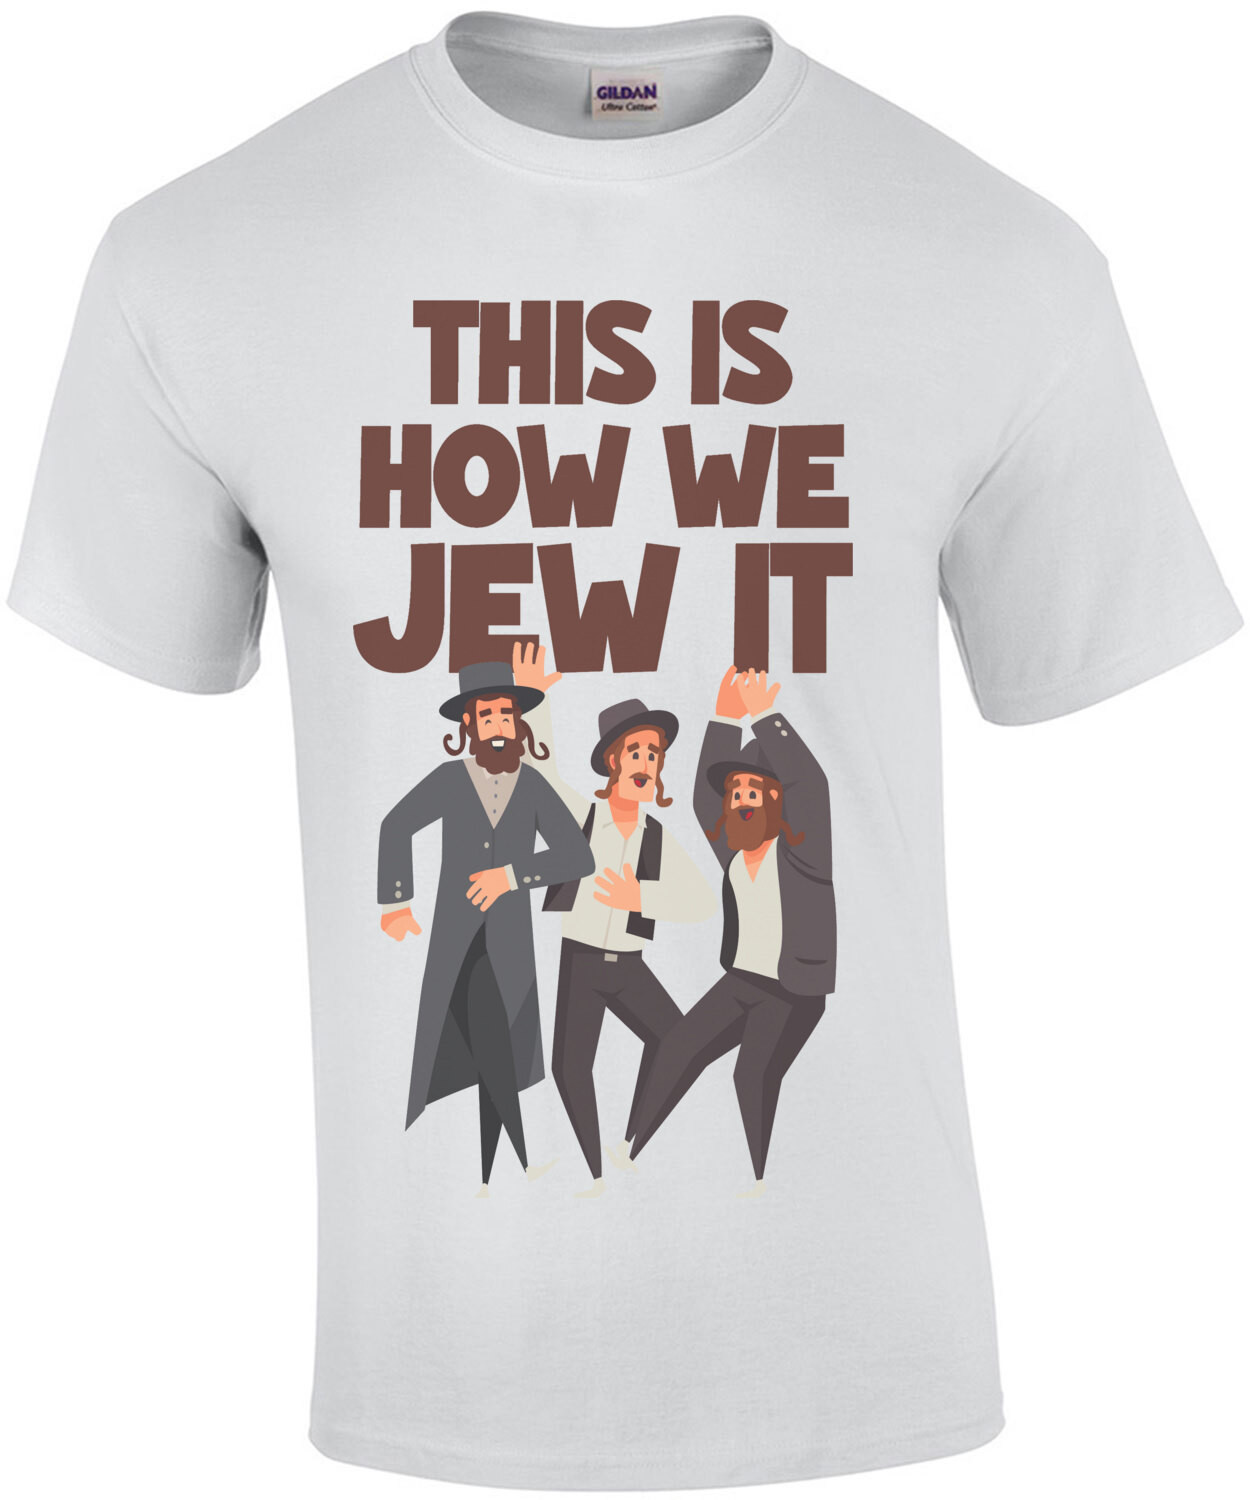 This Is How We Jew It - This Is How We Do It - Motel Jordan Parody - Funny 90's Hip Hop Jewish T-Shirt